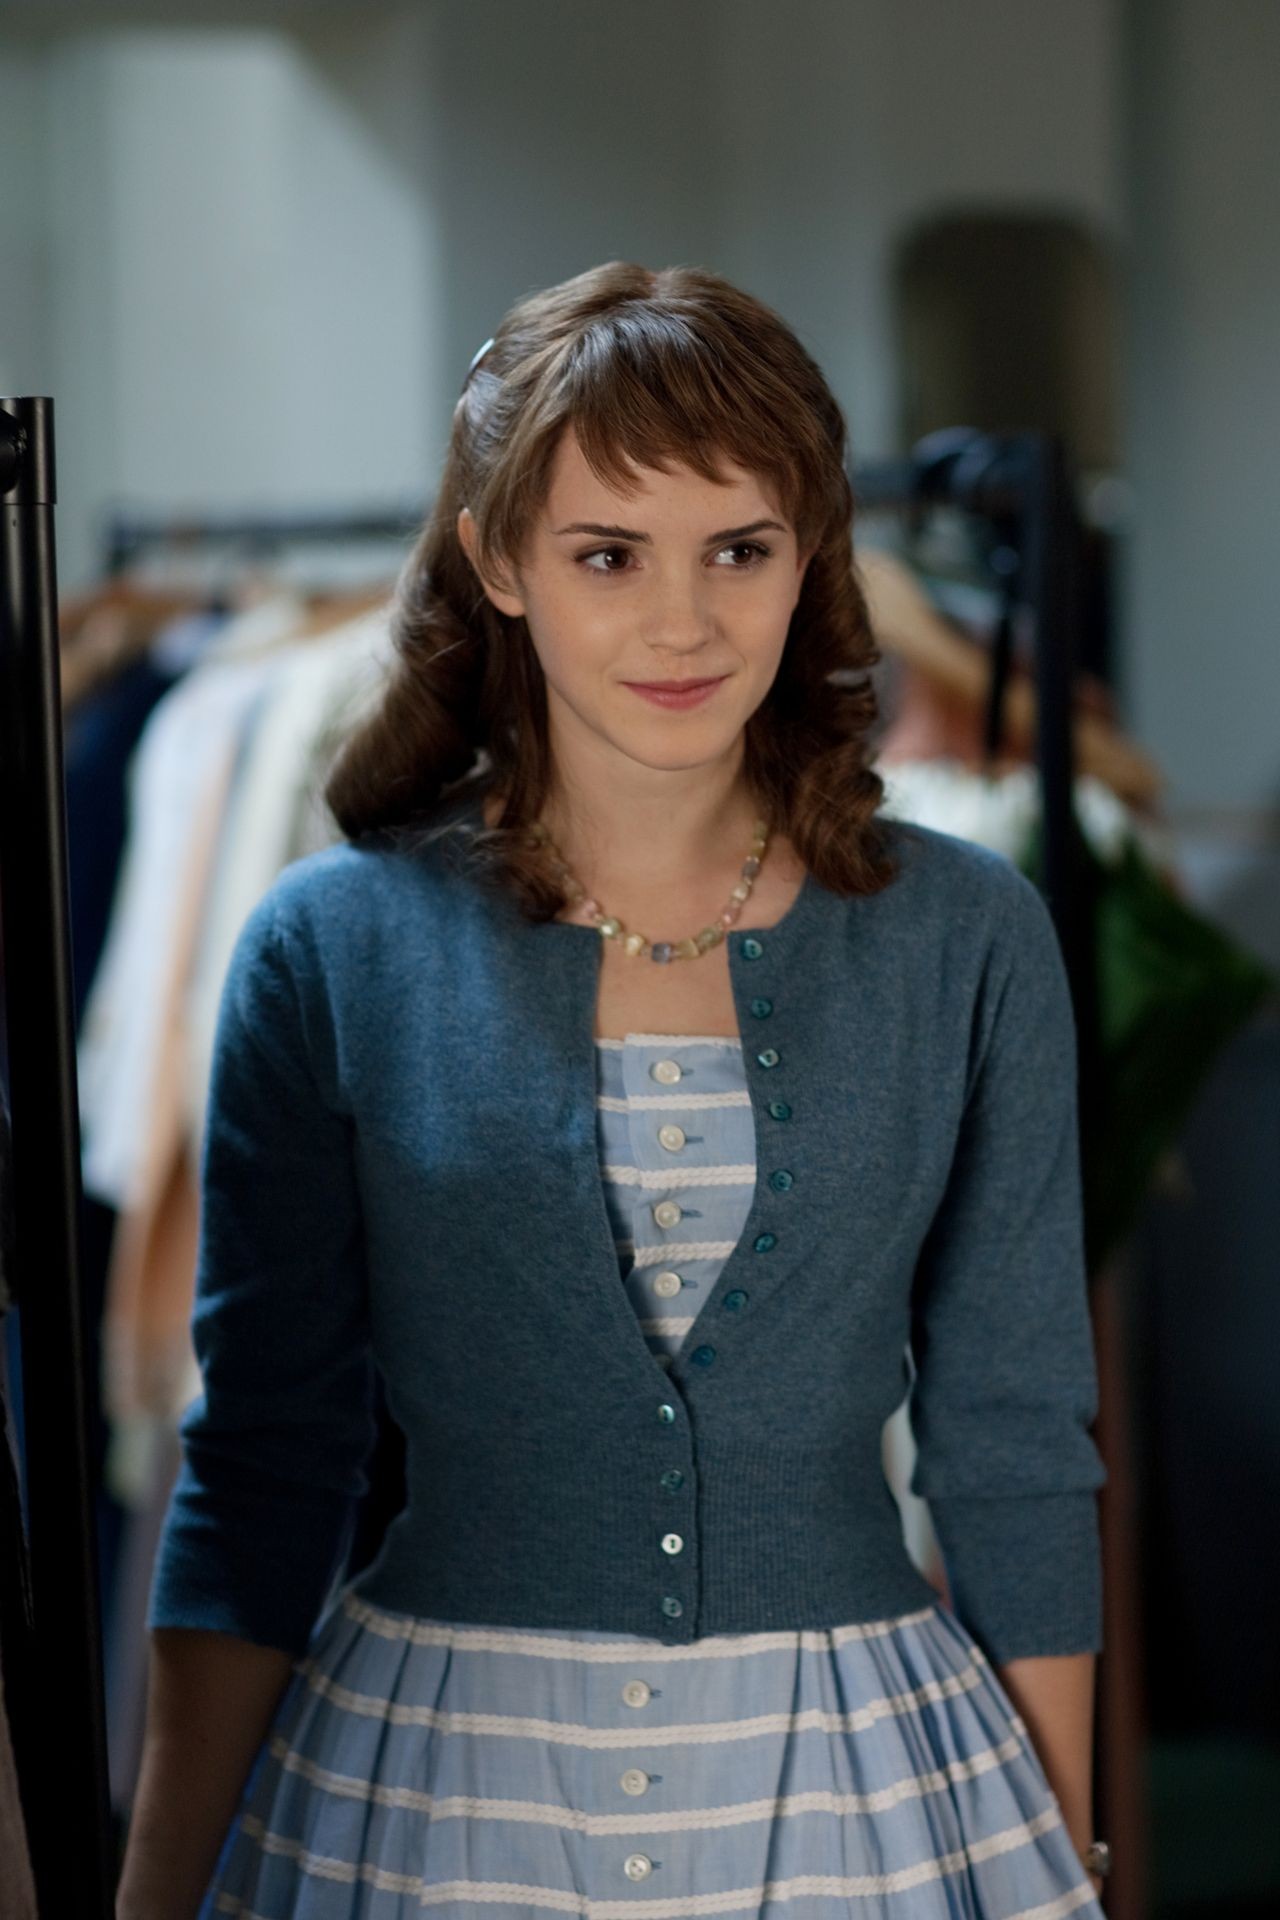 Emma Watson stars as Lucy in The Weinstein Company's My Week with Marilyn (2011). Photo credit by Laurence Cendrowicz.